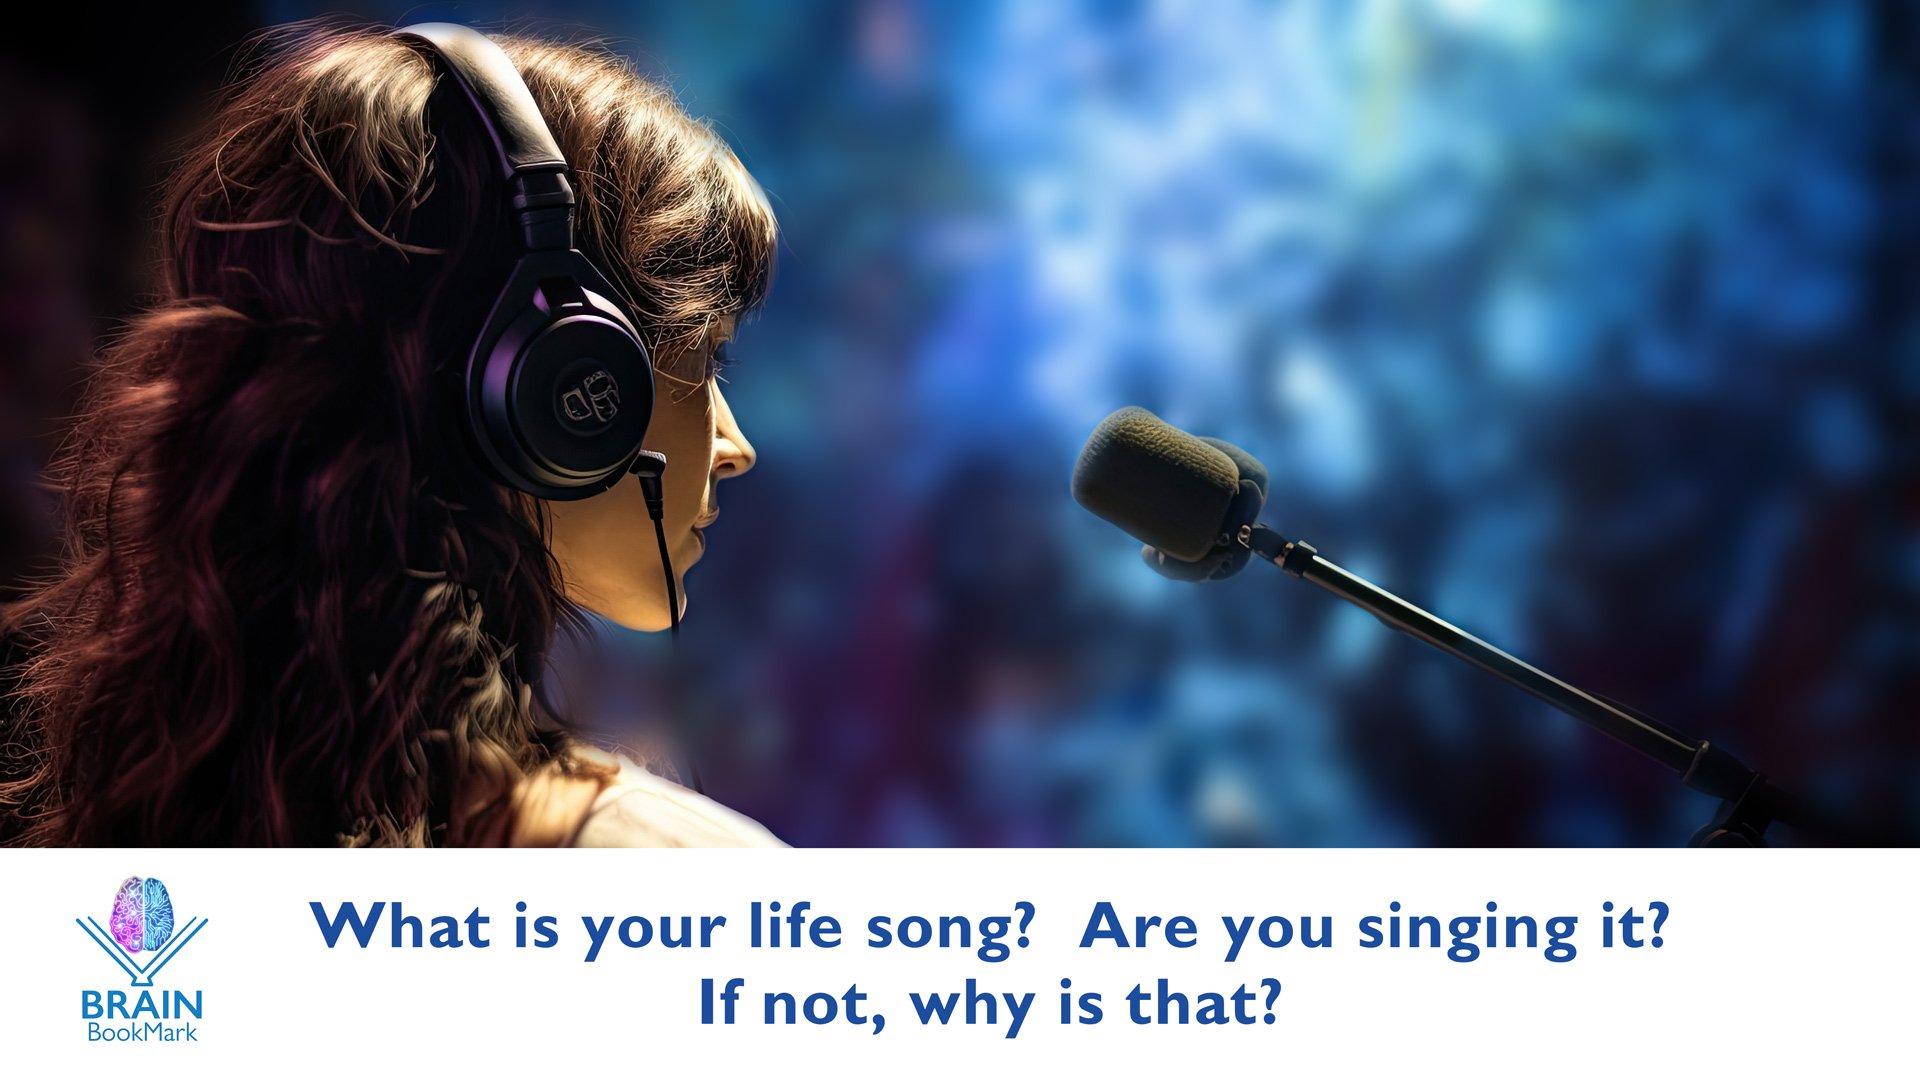 What is your life song? Are you singing it? If not, why is that?